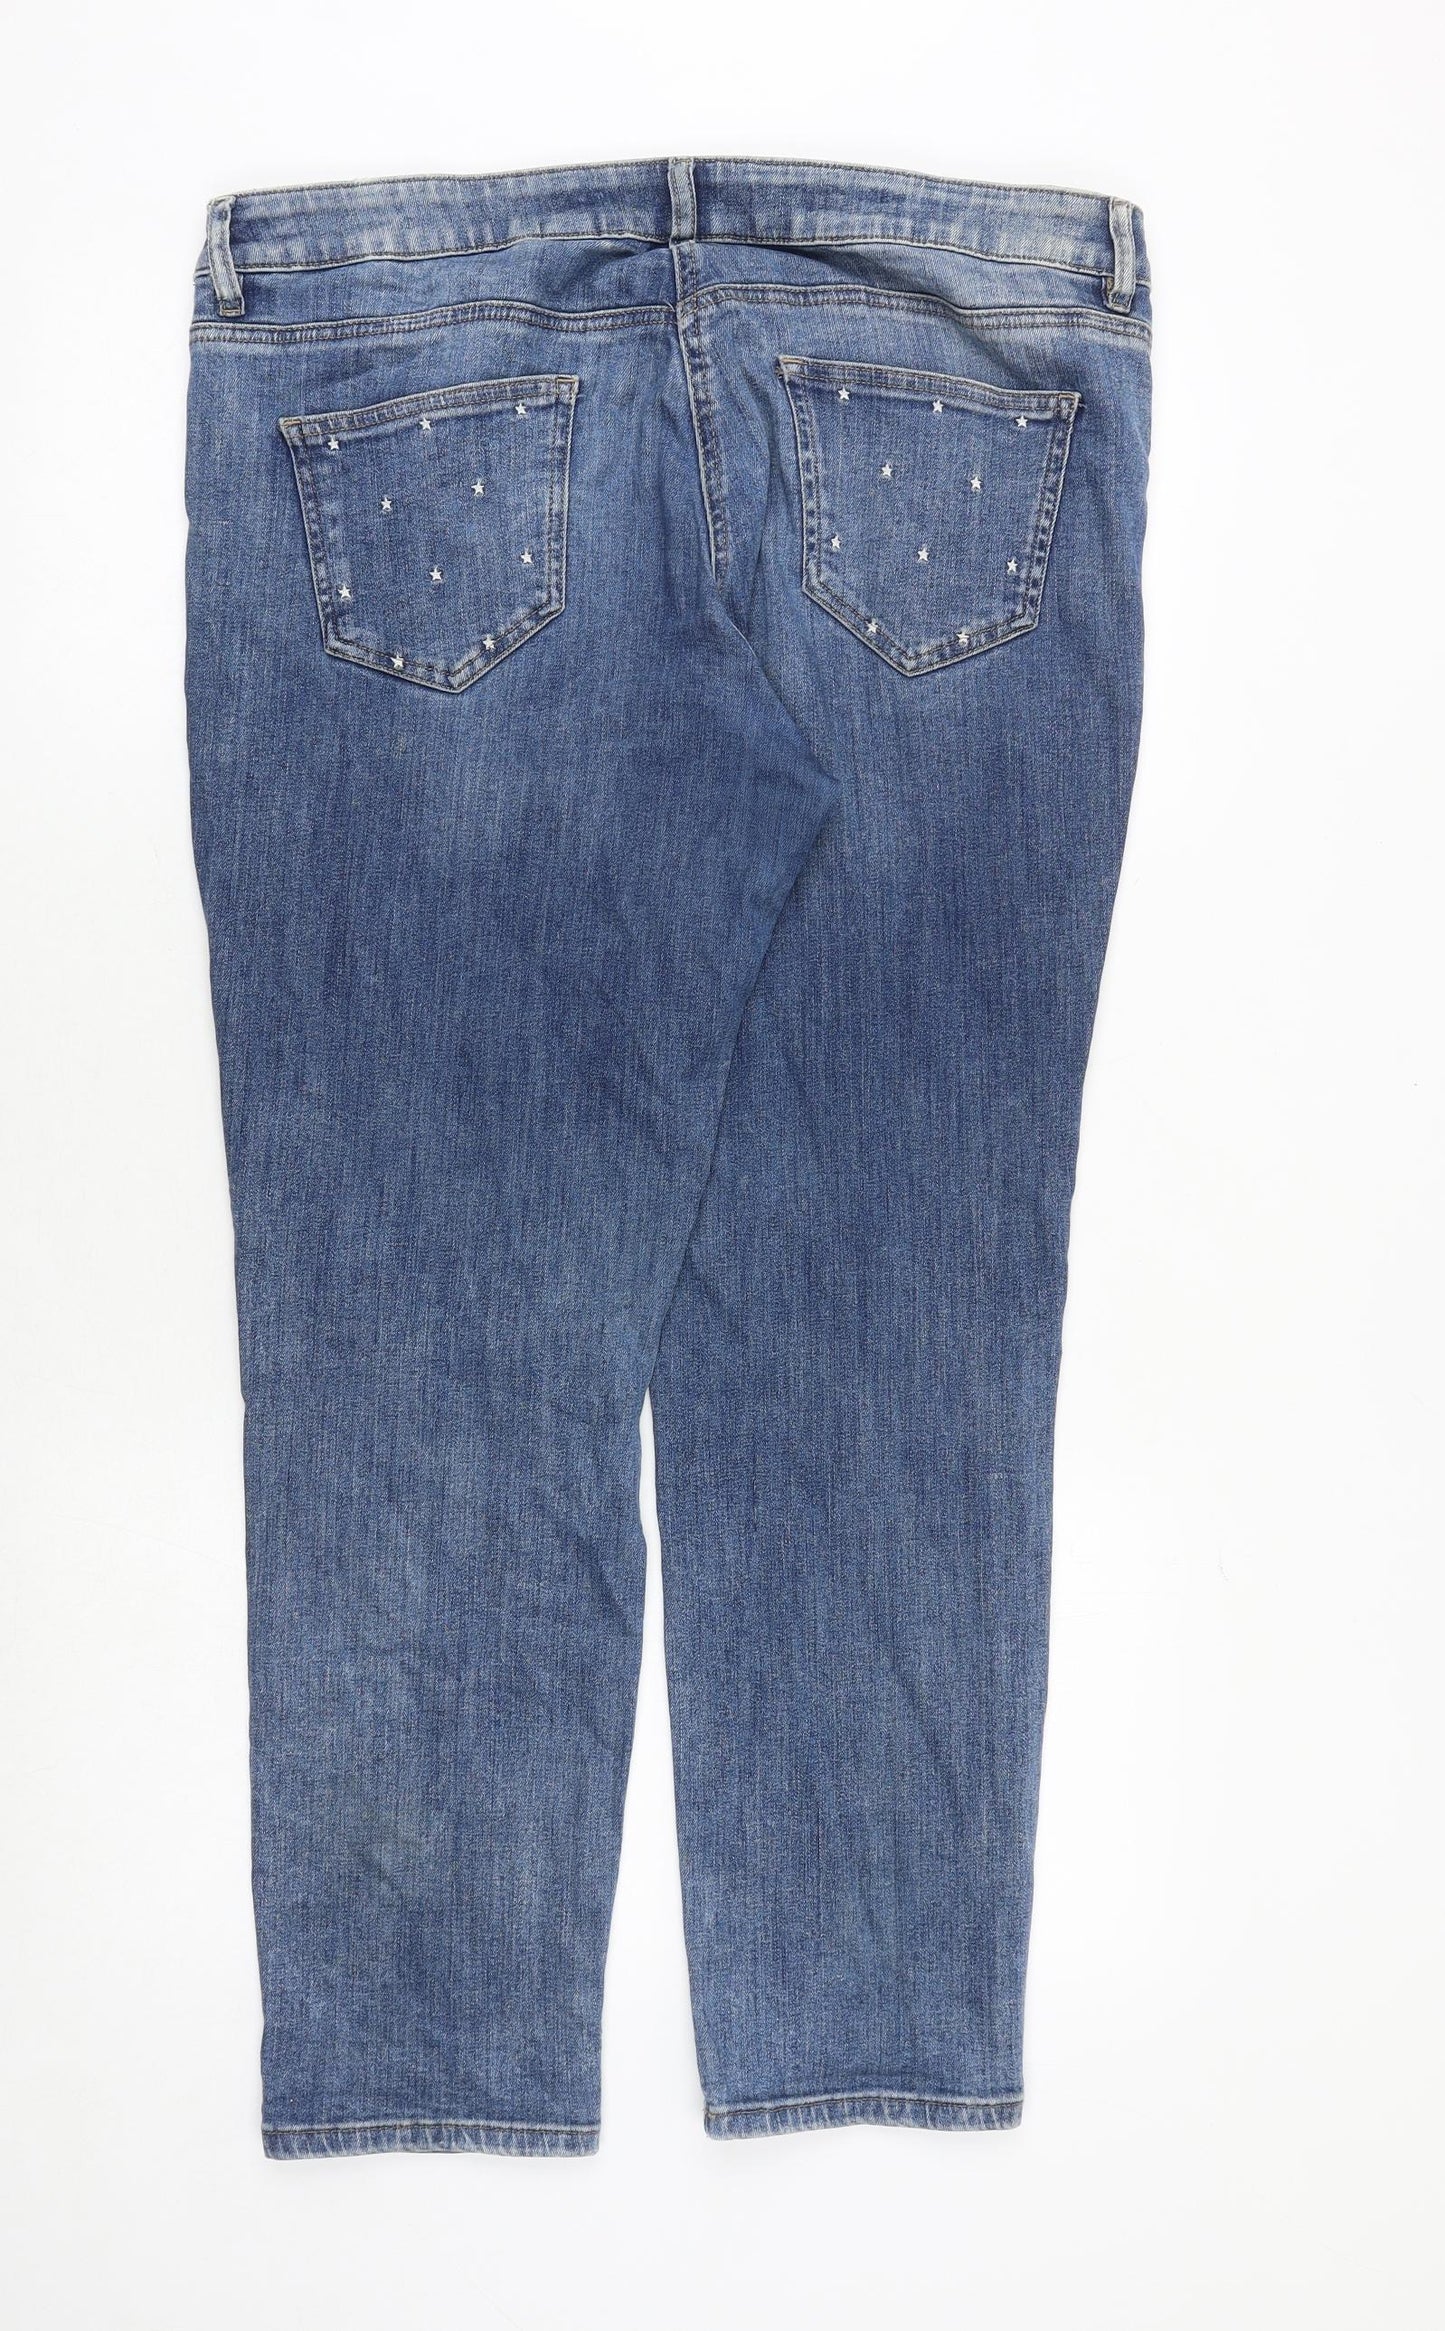 NEXT Womens Blue Geometric Cotton Skinny Jeans Size 14 Relaxed Zip - Star Pattern